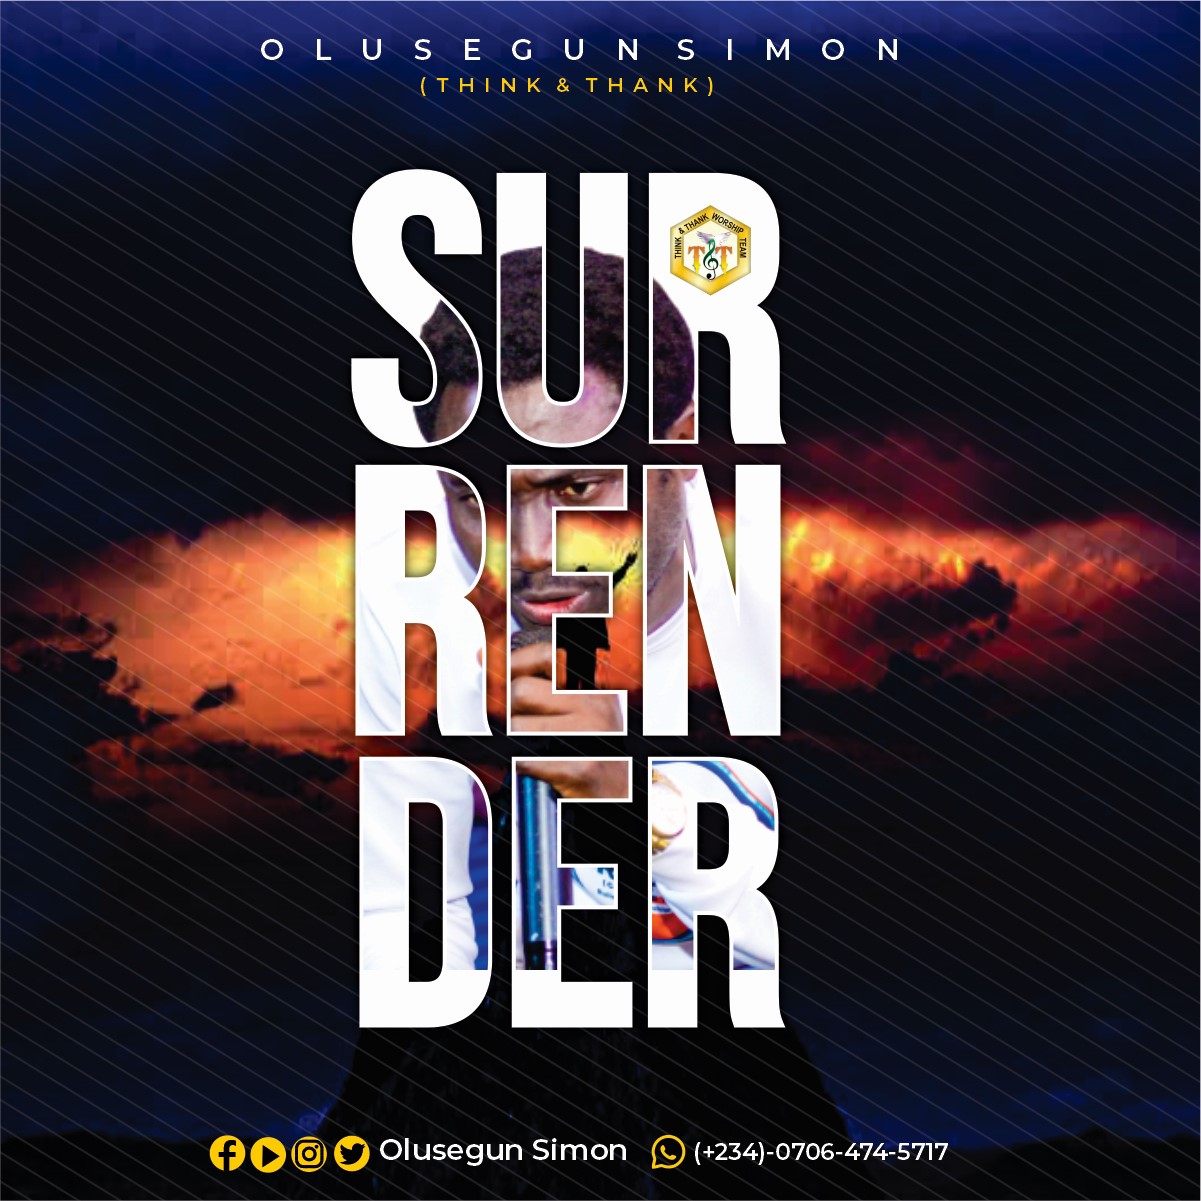 Download Song: SURRENDER by Olusegun Simon 22